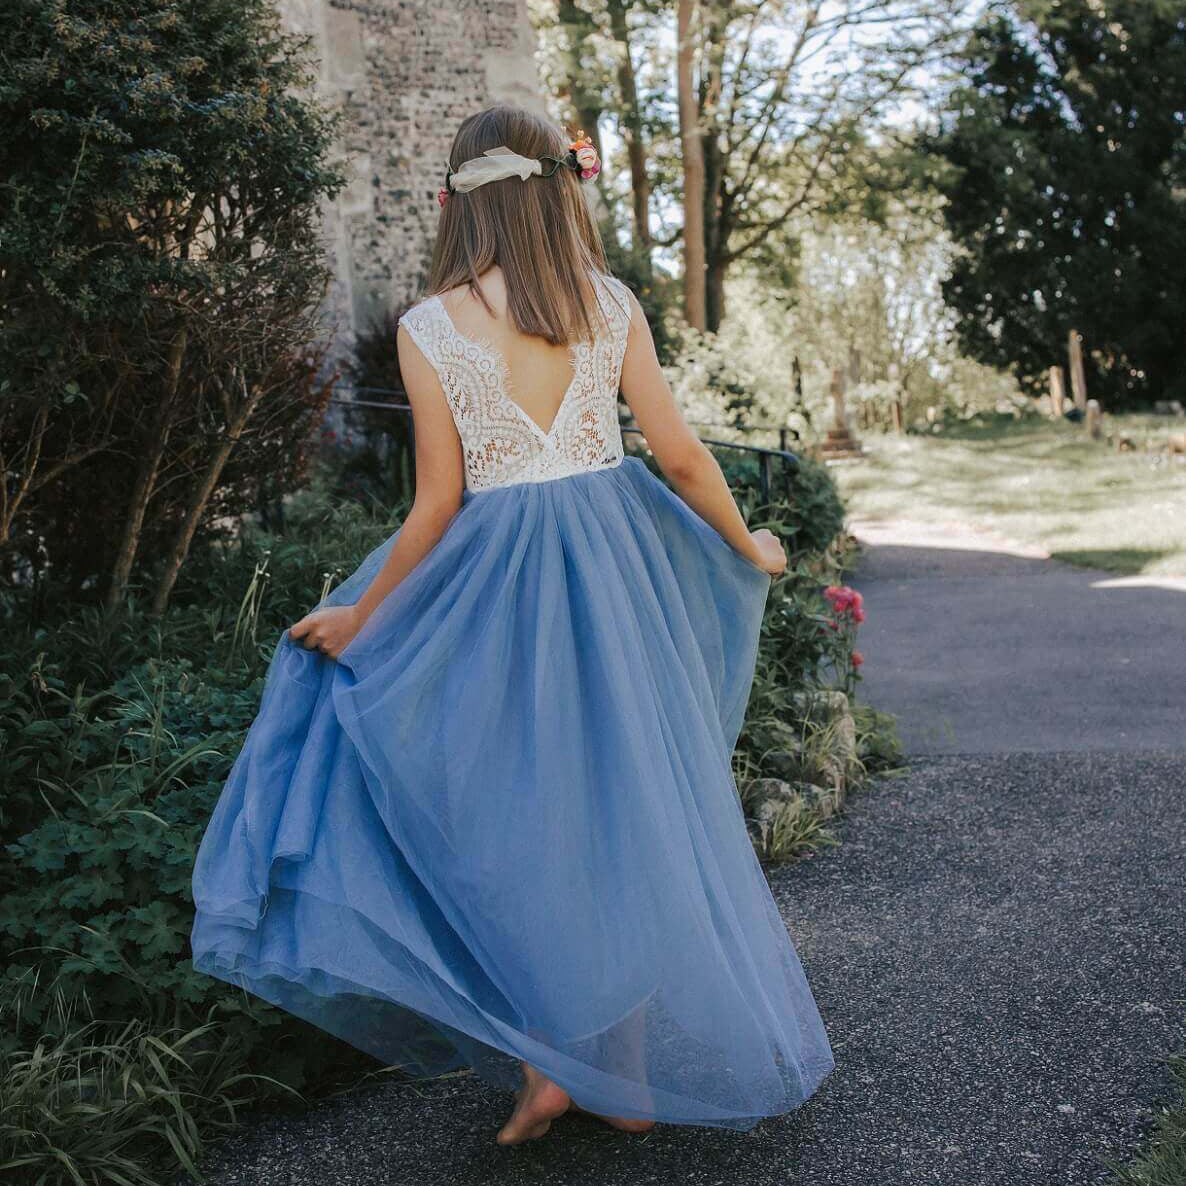 Girl twirling in a bohemian classic dress from The Fairy Princess